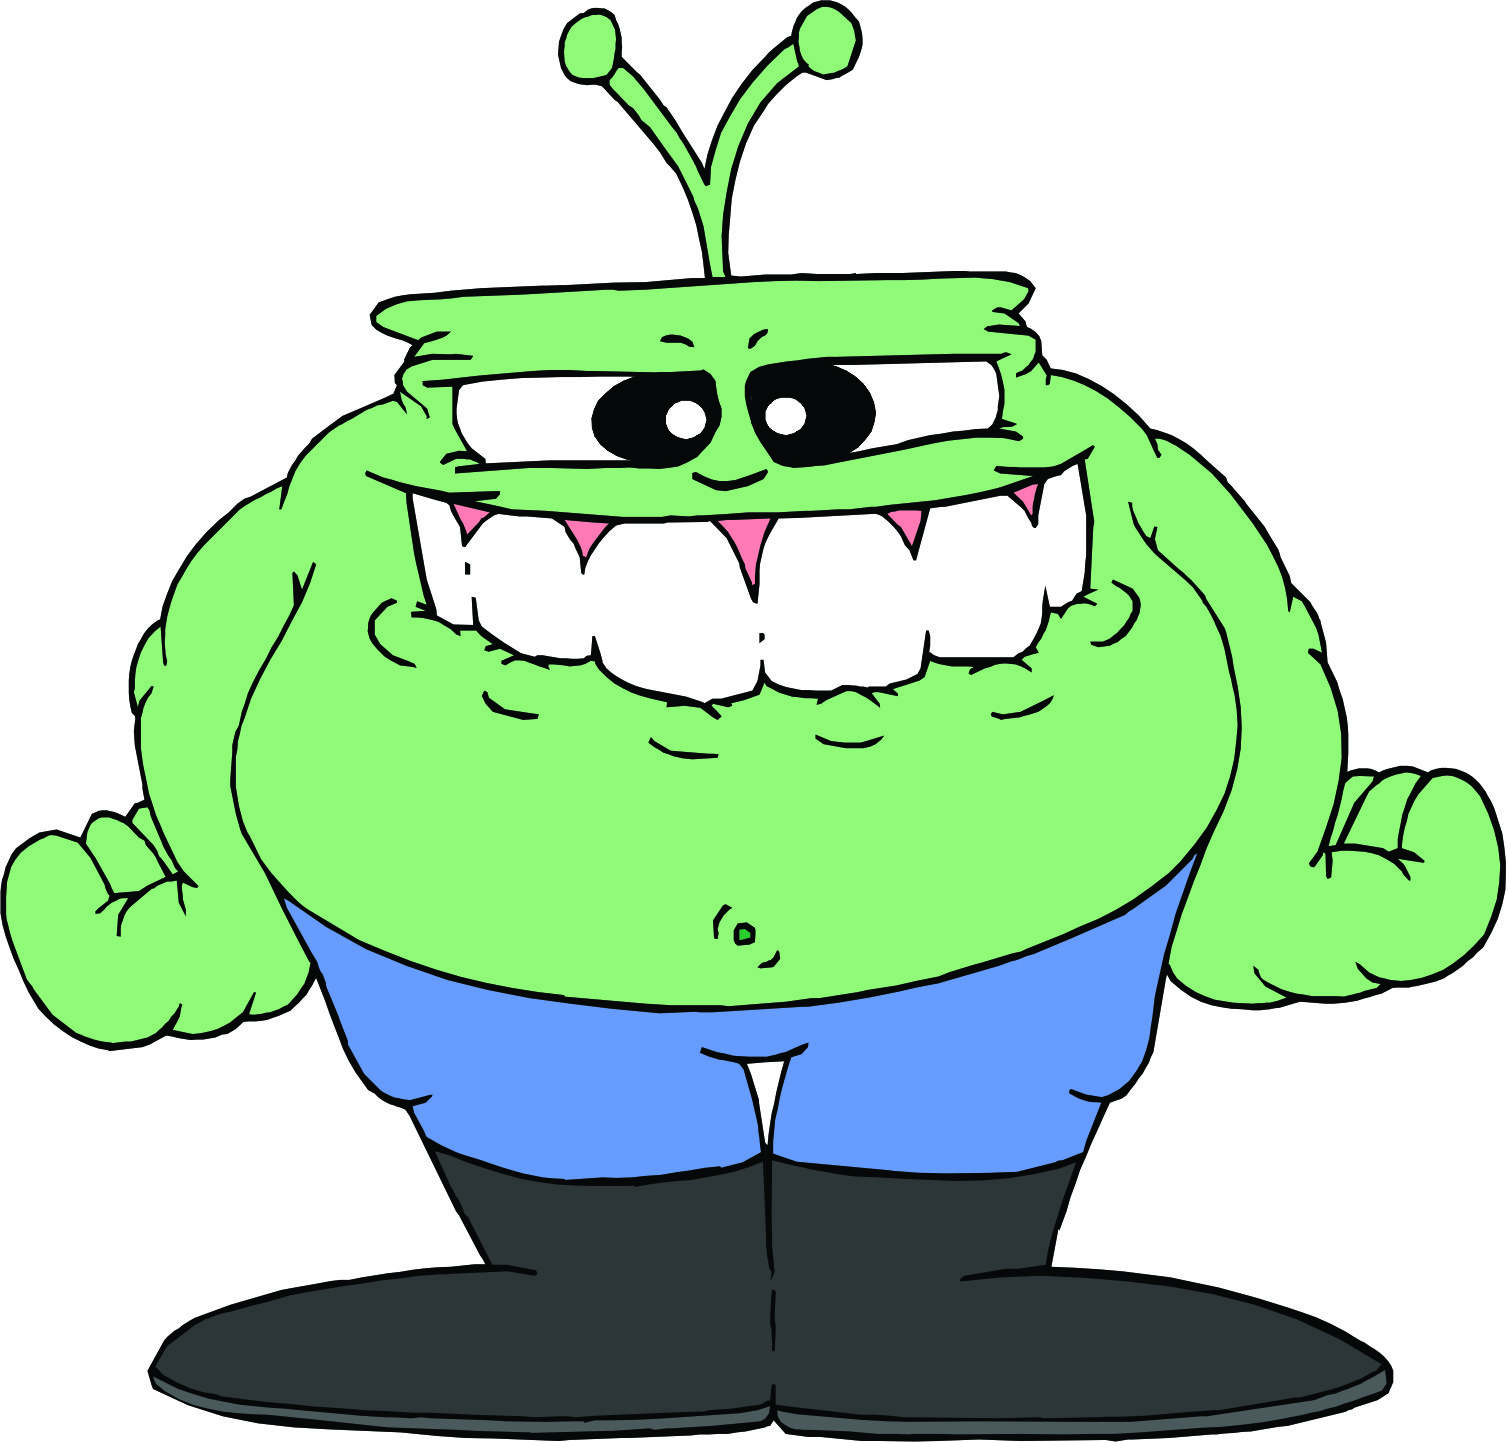 Cartoon Aliens | Page 2 - Clipart library - Clipart library